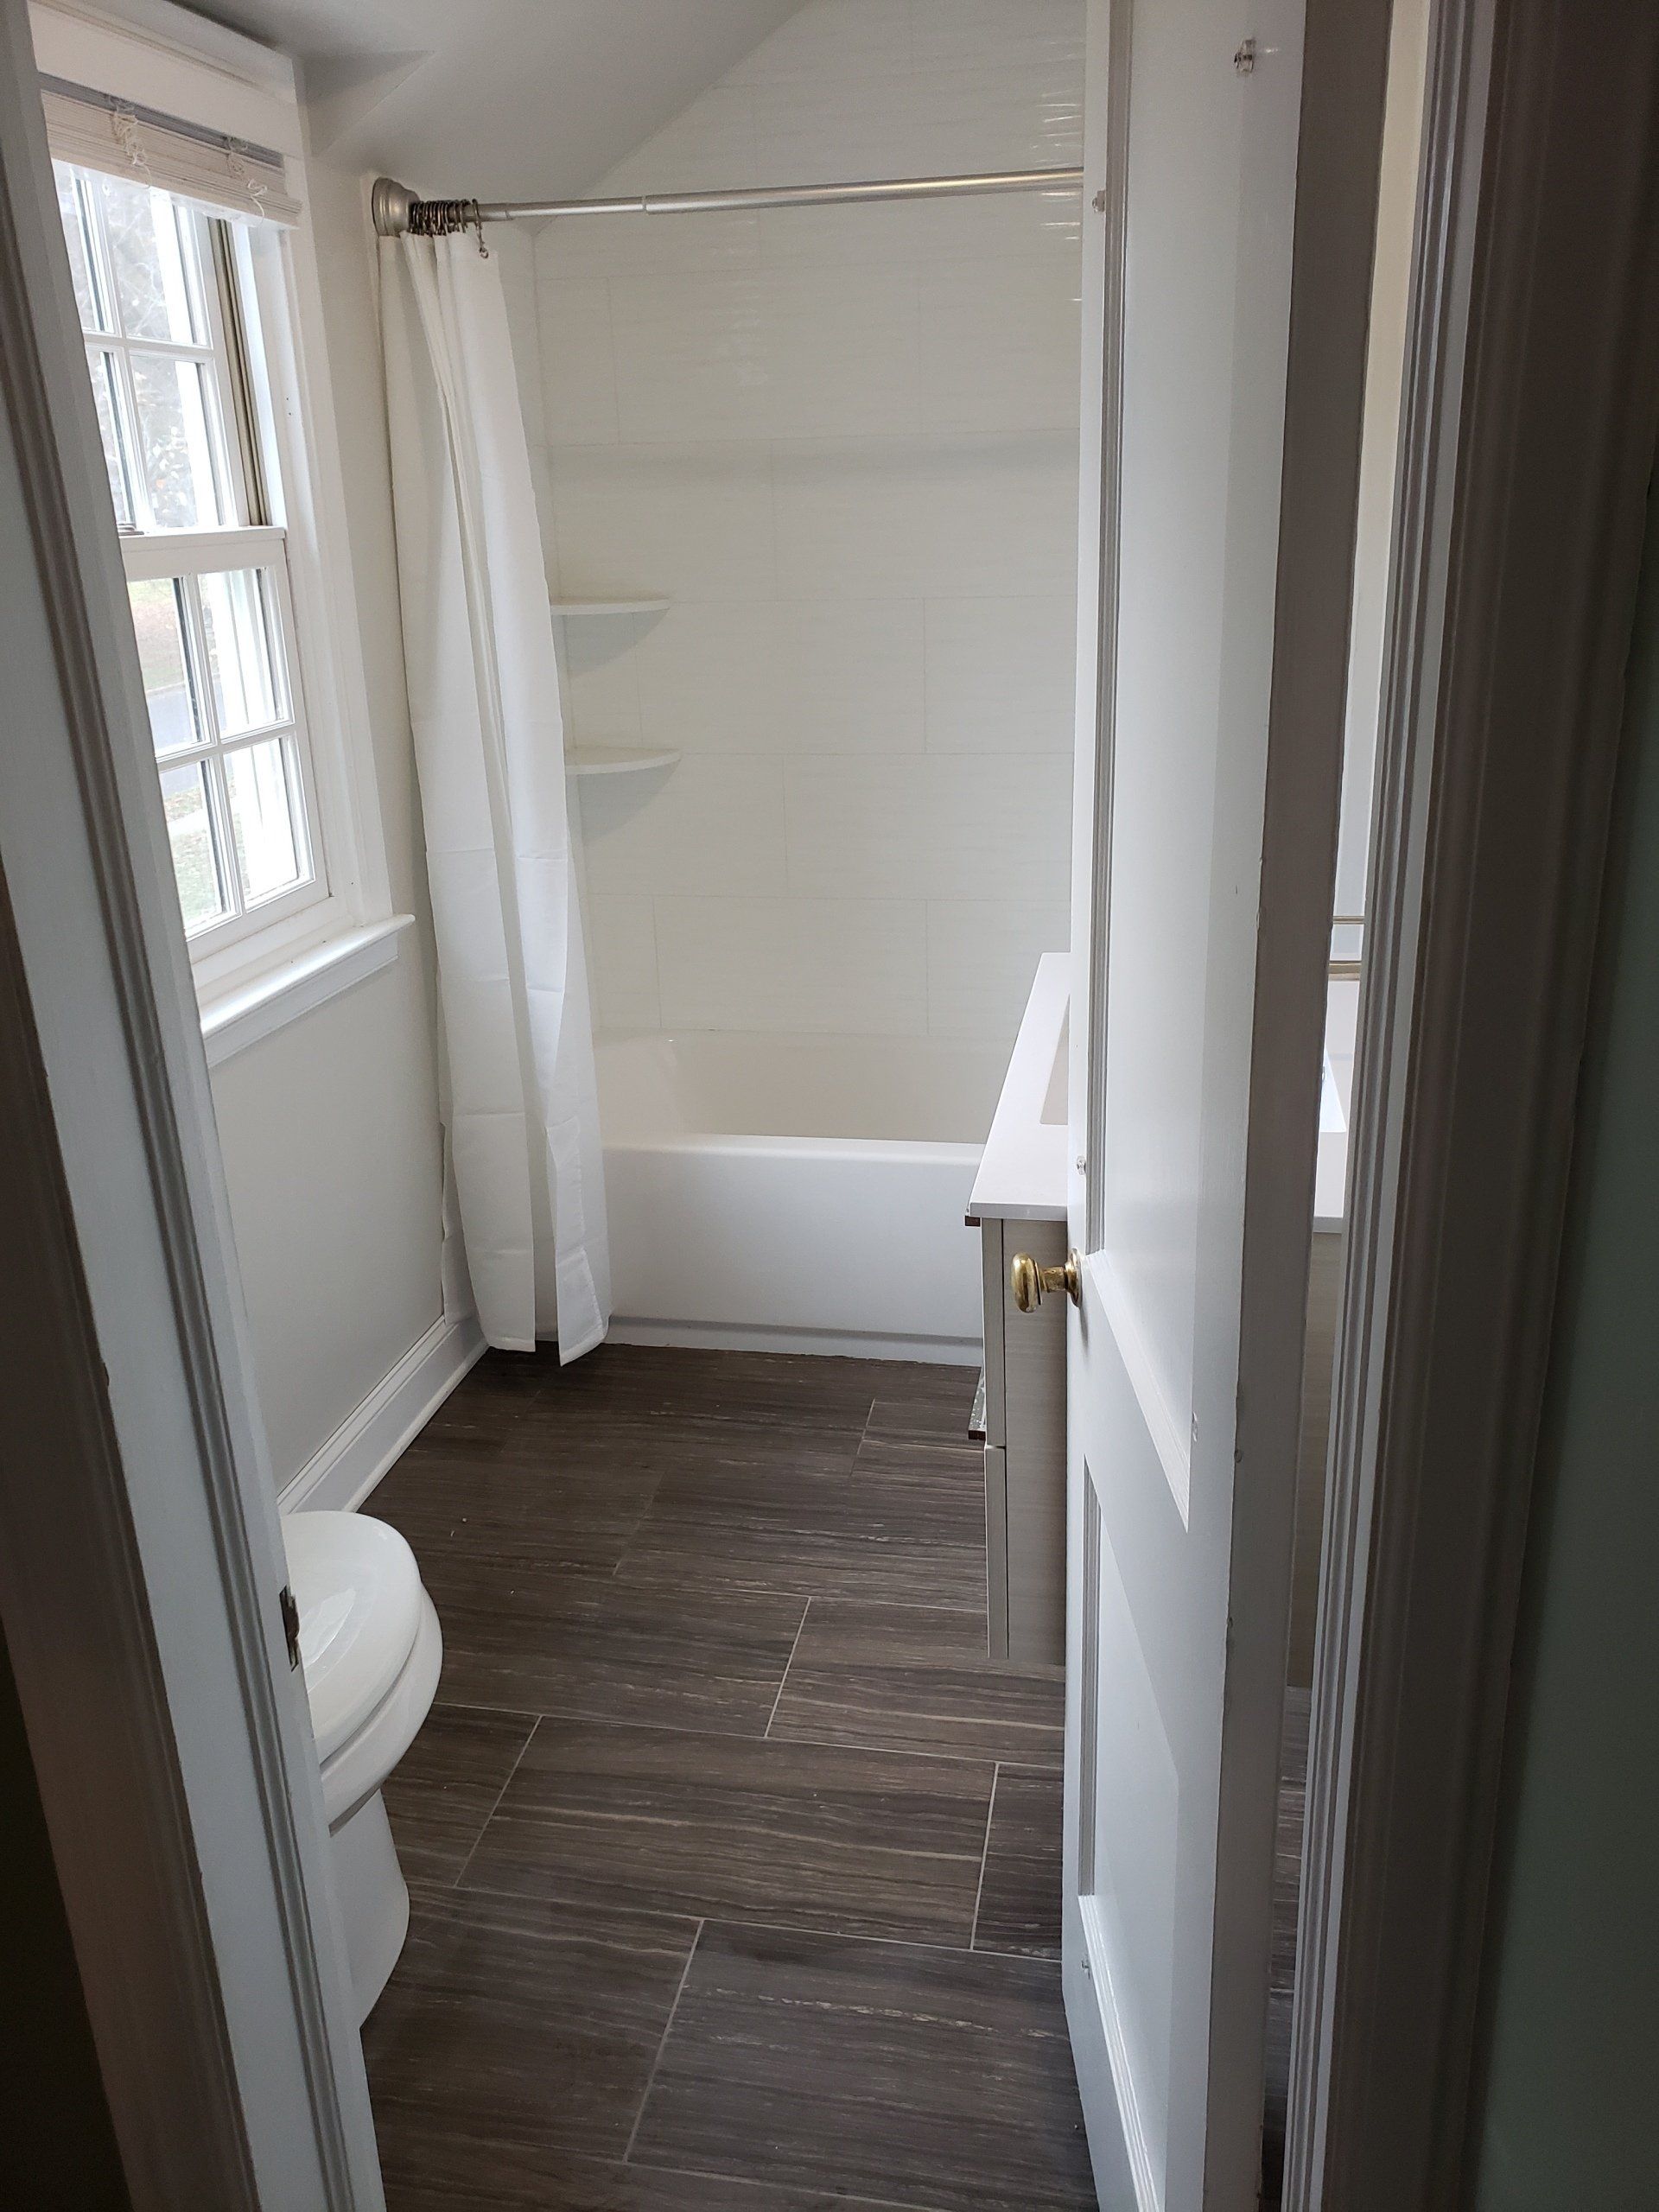 View of floor tiles, shower tiles, bathtub, wall paint and window in this bathroom remodel in Willow Grove.